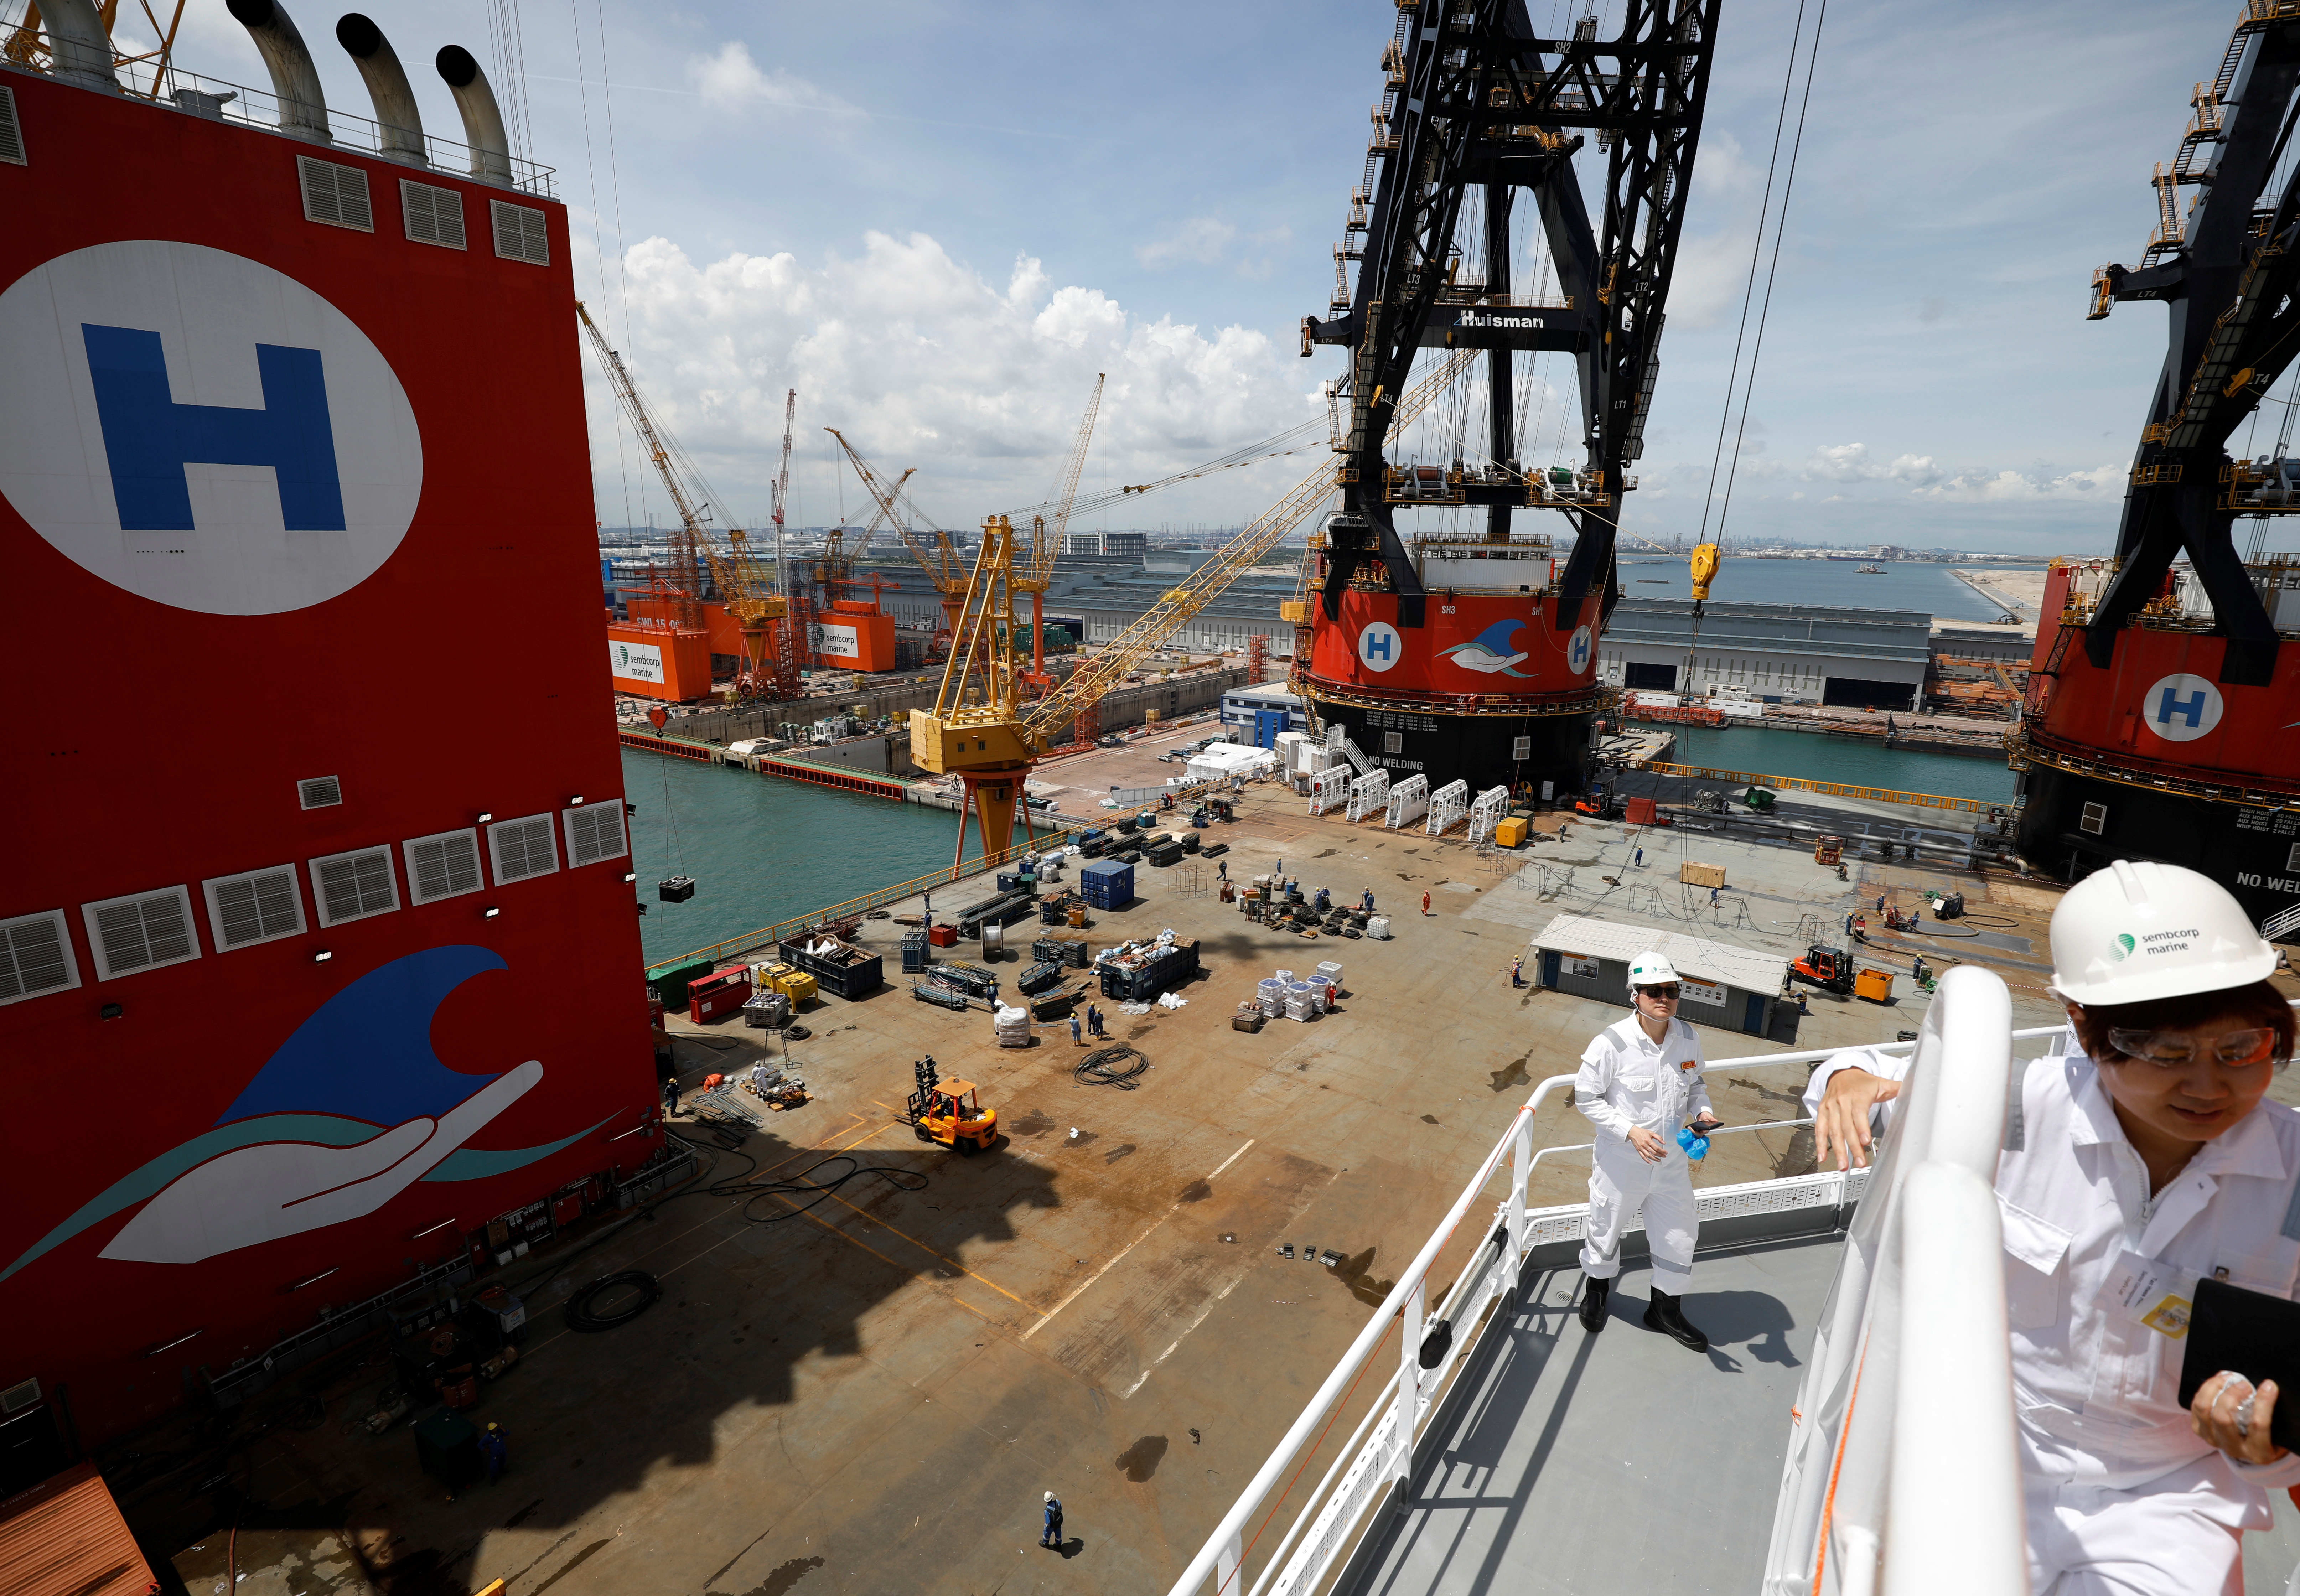 Members of the media tour operate deck of the Heerema Marine Contractors' Sleipnir, the world's largest semi-submersible crane vessel, at the Sembcorp Marine shipyard in Singapore